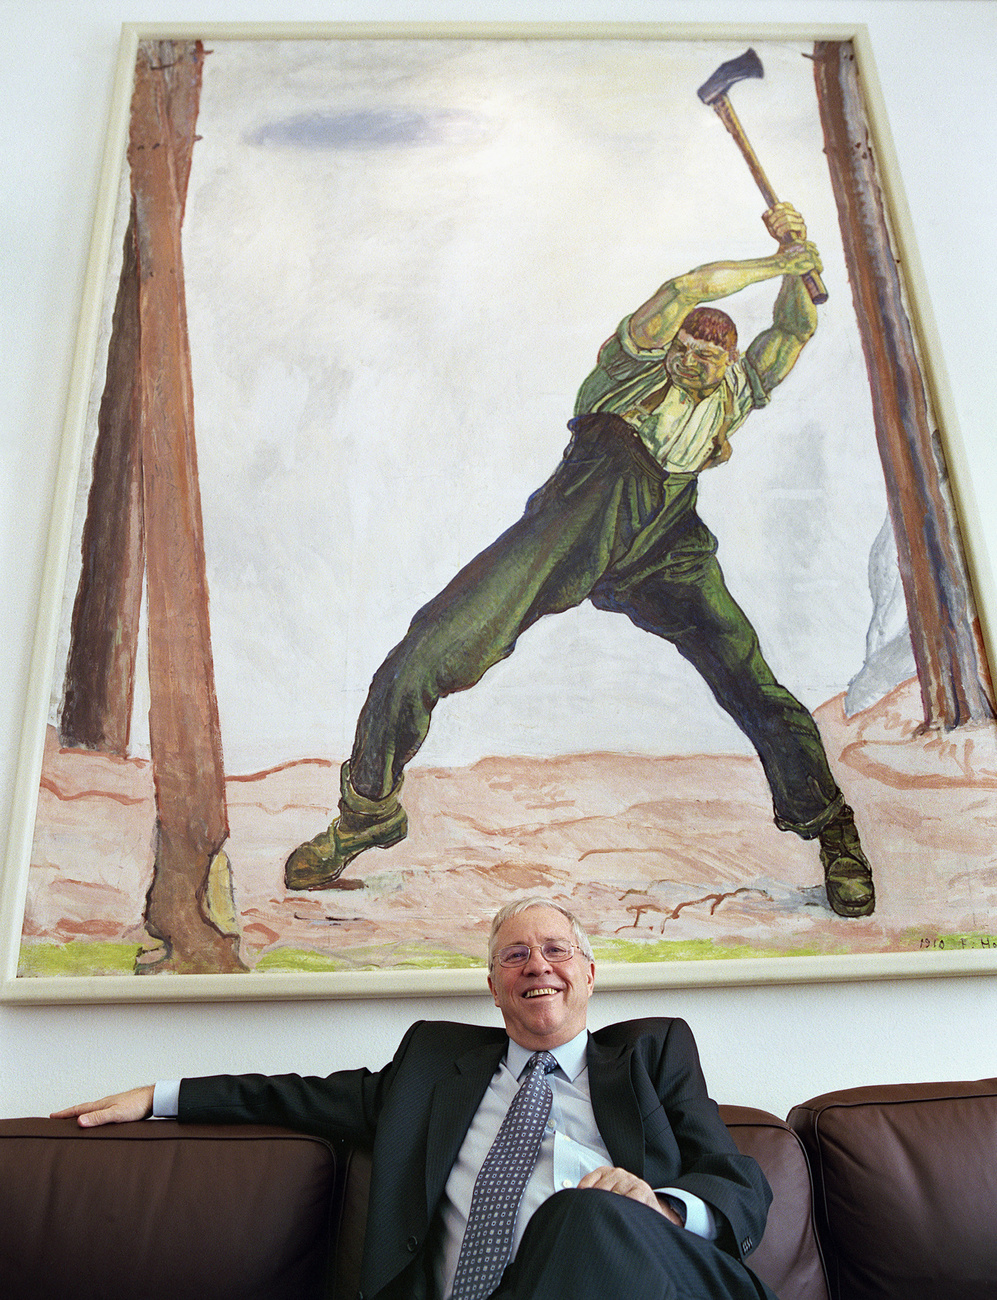 Former Federal Councillor and leader of the right-wing Swiss People's Party Christoph Blocher, posing in his office at the Federal Palace in Bern (2005), with Hodler's The Woodcutter hanging in the background.